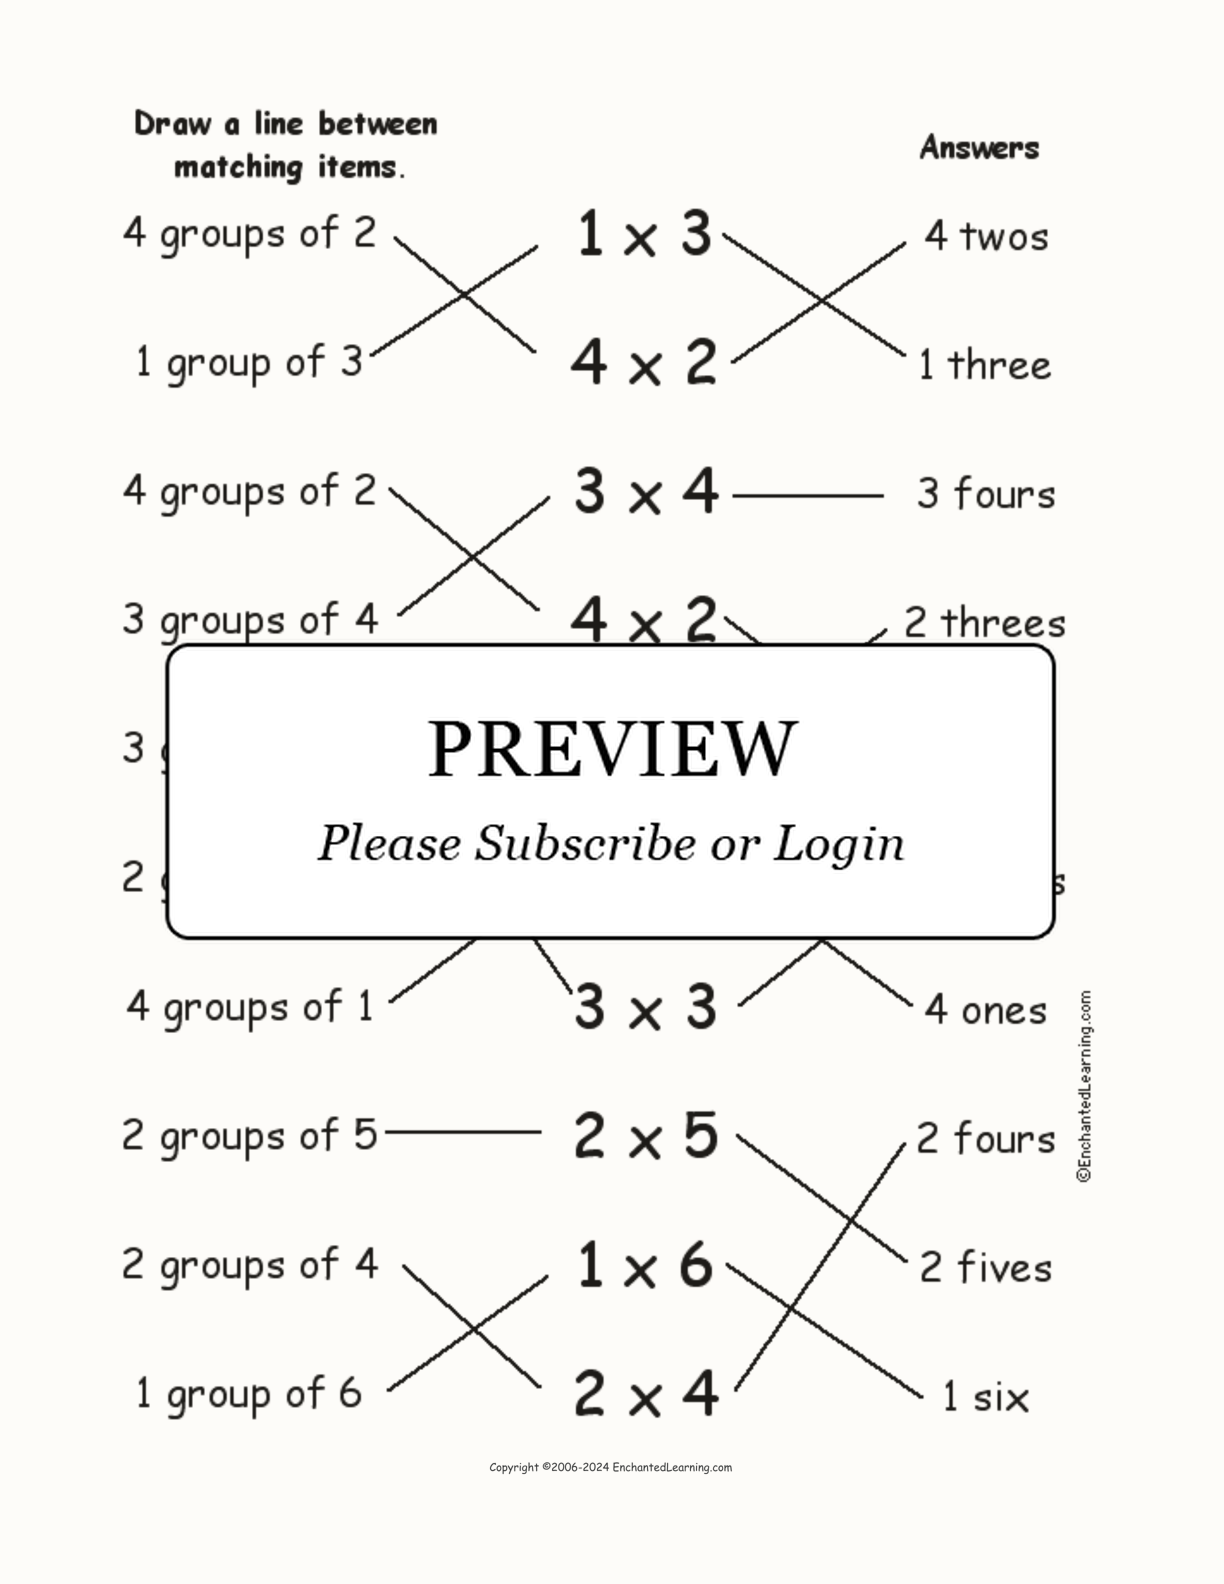 multiplication-match-groups-of-numbers-enchanted-learning